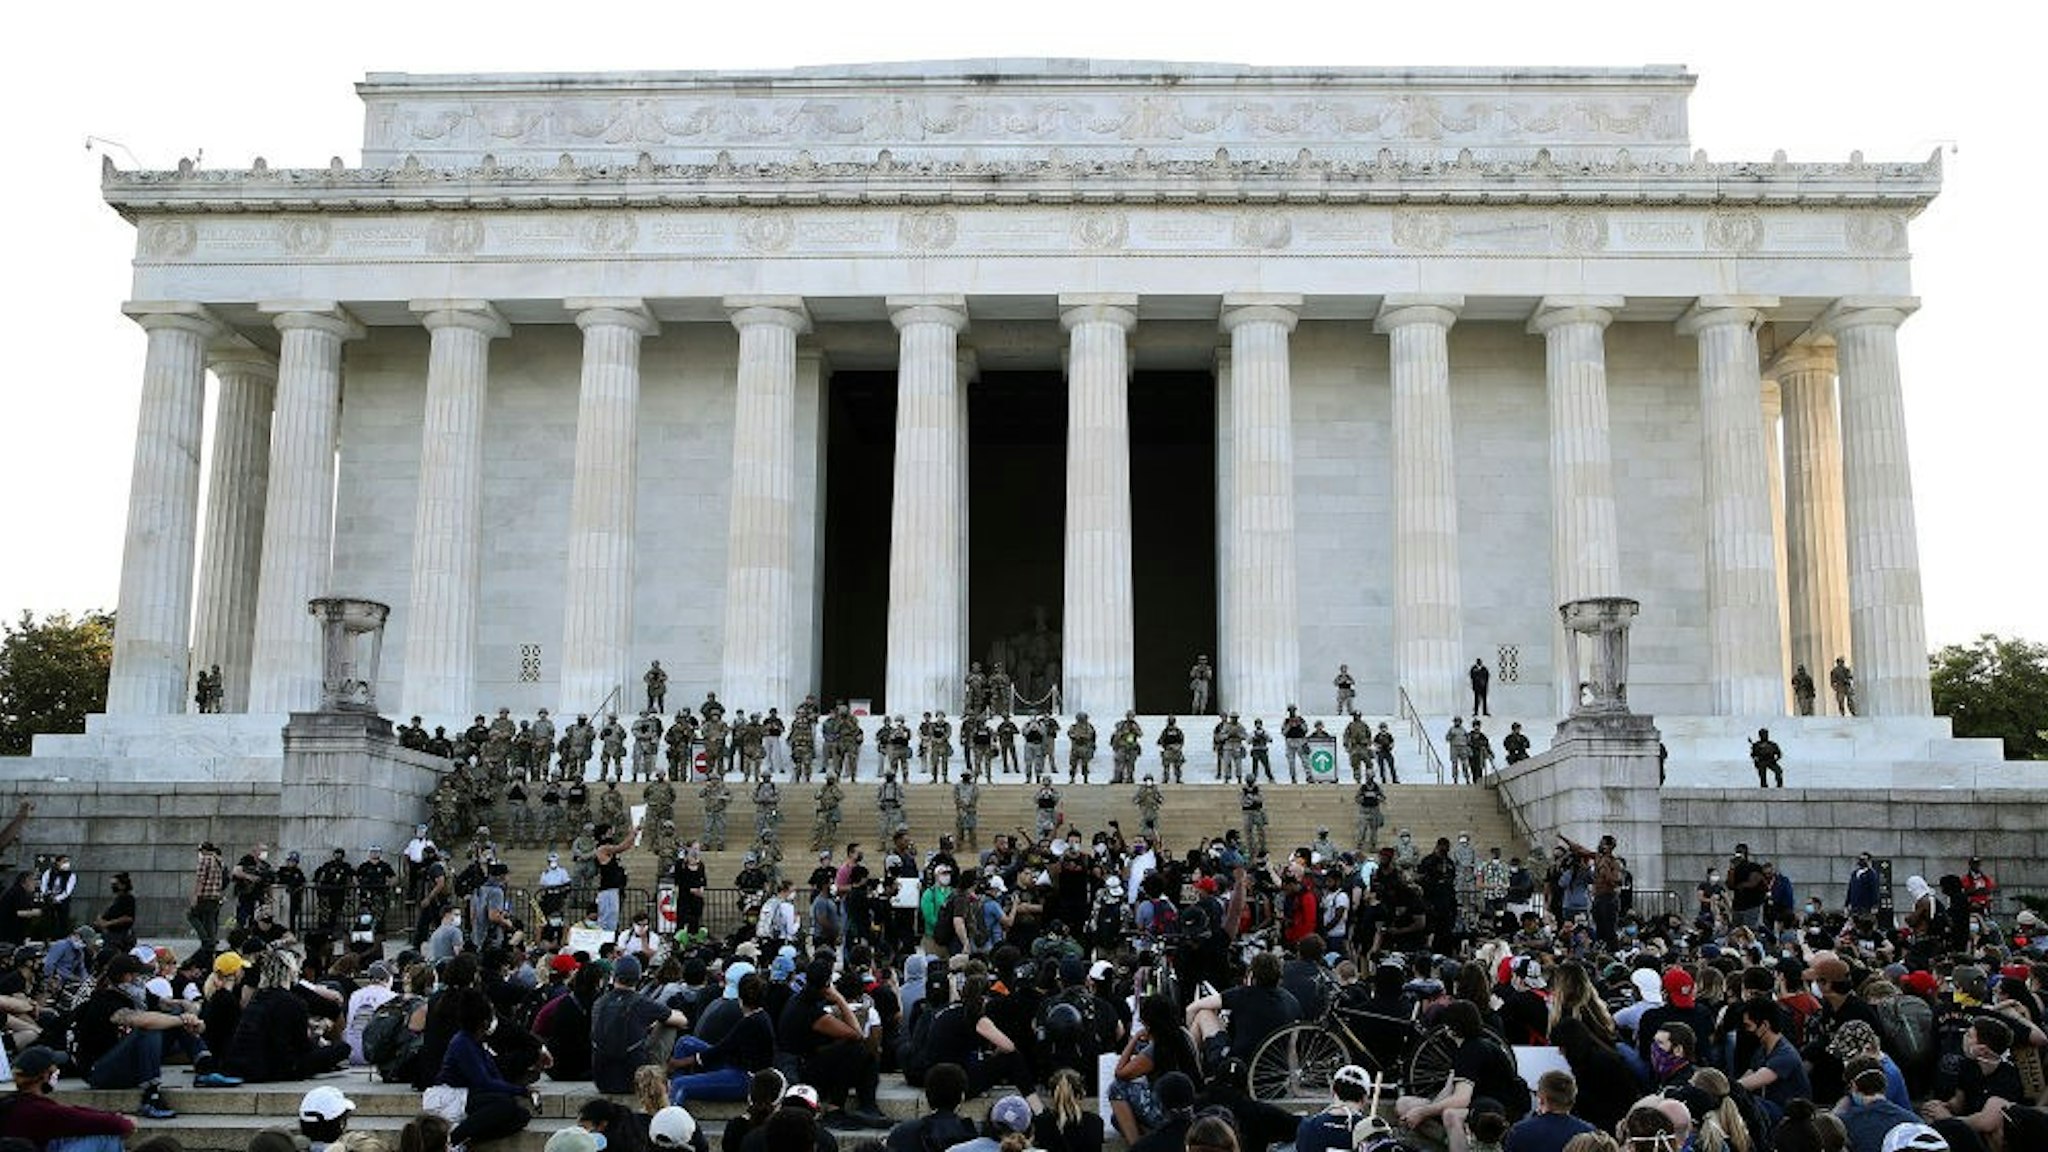 WASHINGTON, DC - JUNE 02: Members of the D.C. National Guard stand on the steps of the Lincoln Memorial monitoring a large crowd of demonstrators participating in a peaceful protest against police brutality and the death of George Floyd, on June 2, 2020 in Washington, DC. Protests continue to be held in cities throughout the country over the death of George Floyd, a black man who was killed in police custody in Minneapolis on May 25. (Photo by